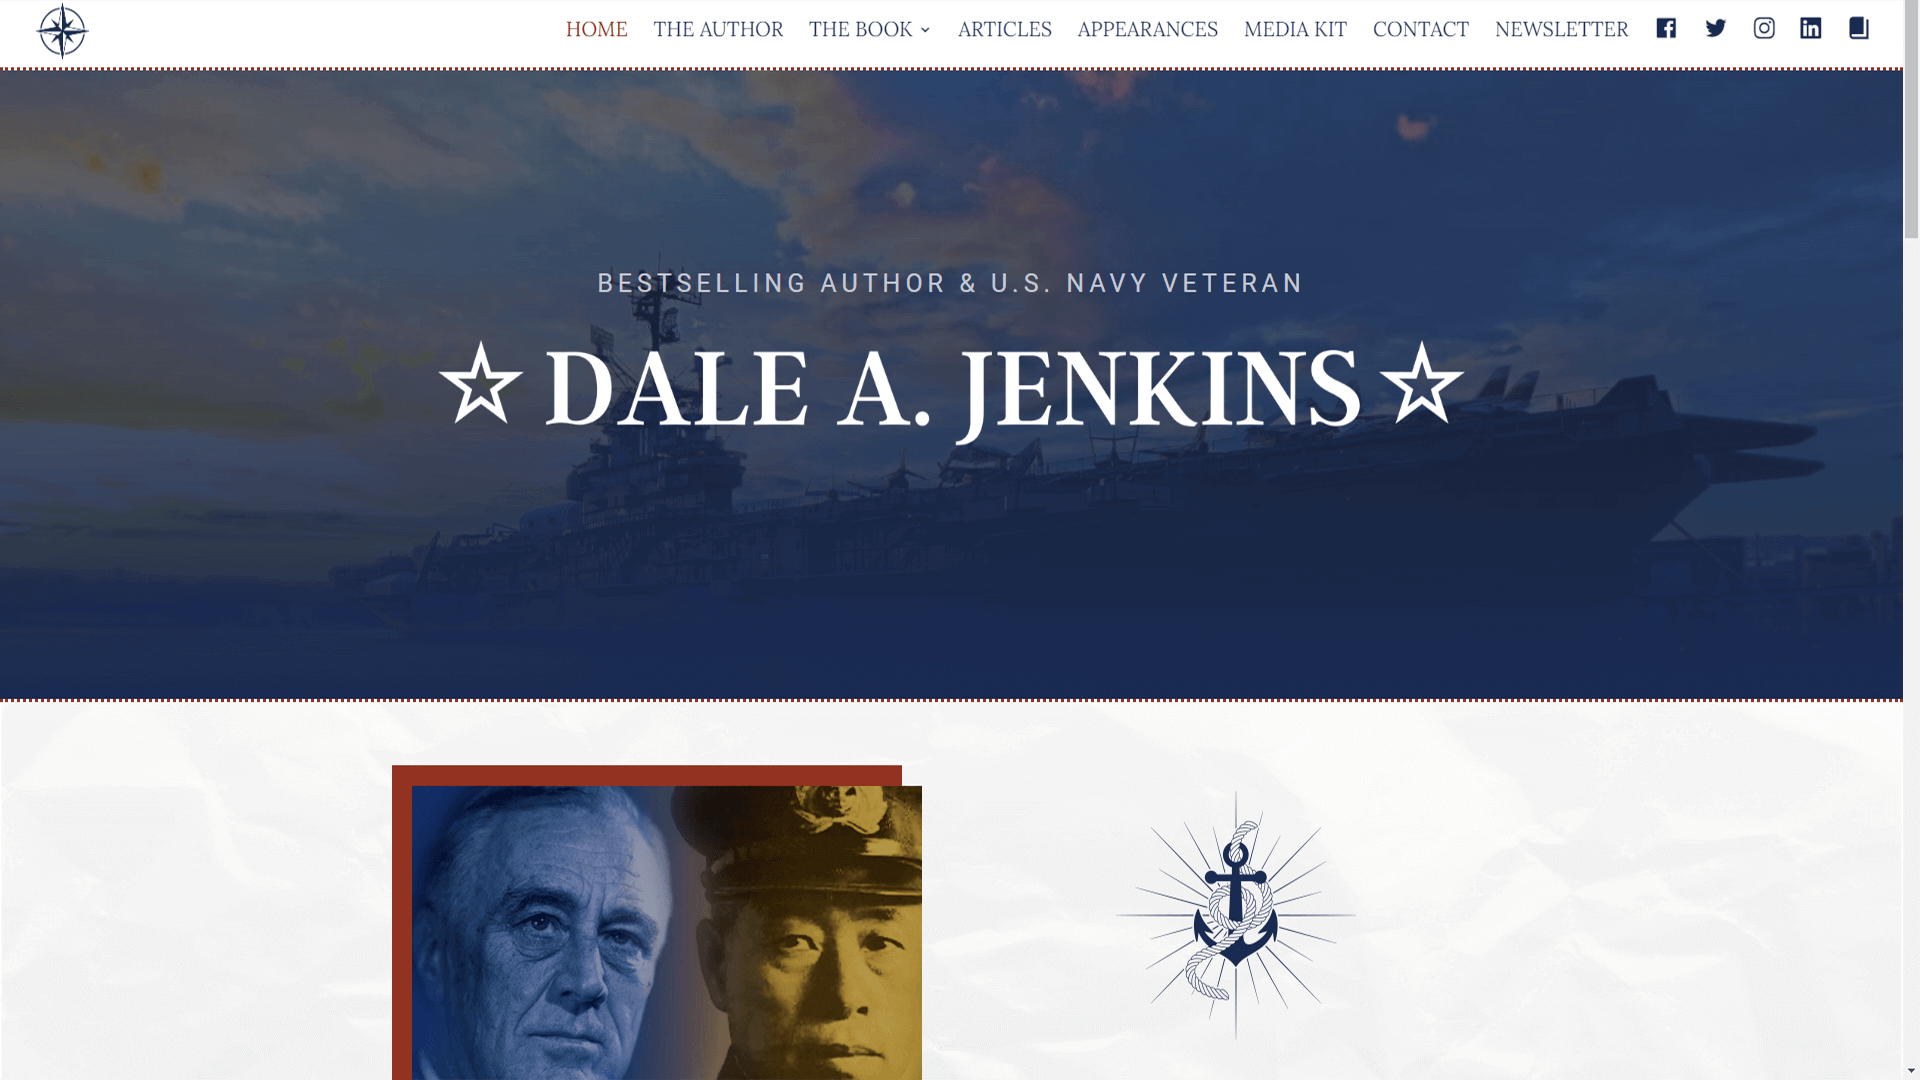 Website Design for Bestselling Author Dale A. Jenkins